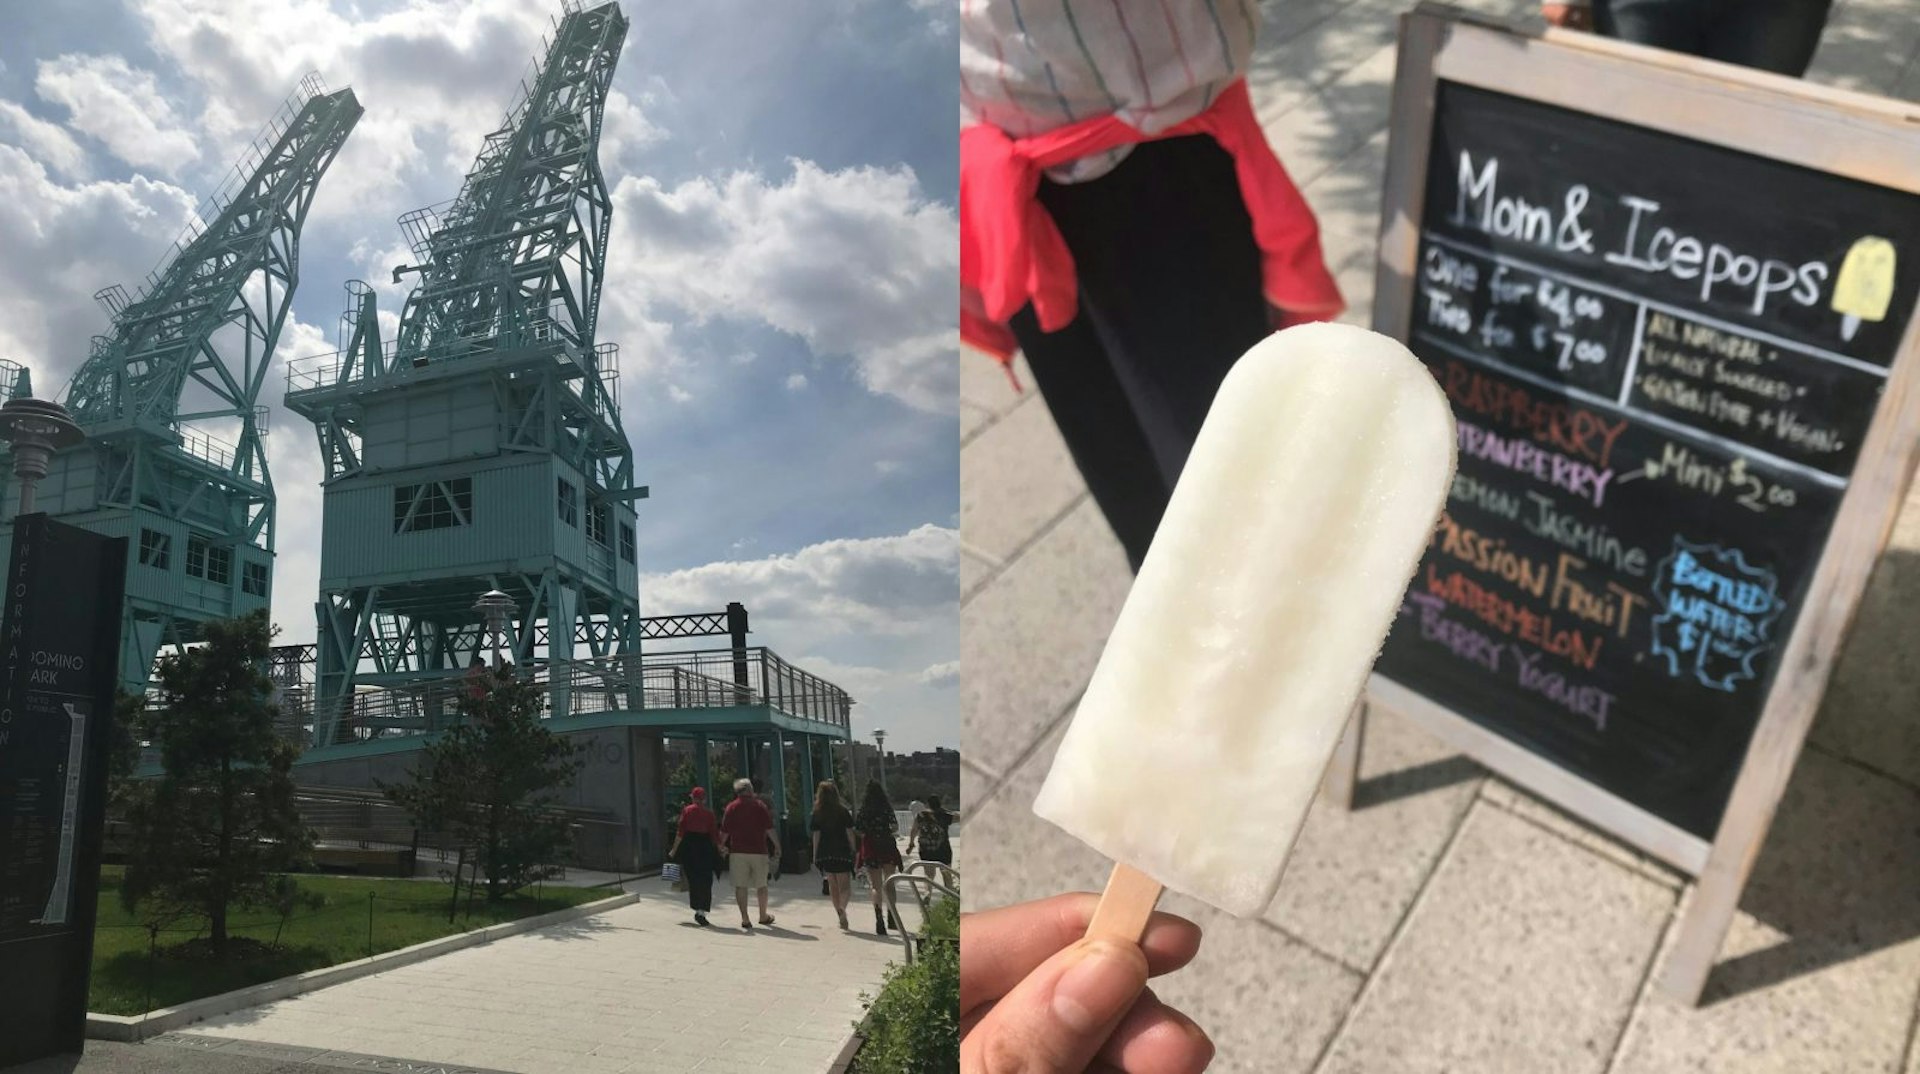 Two images: the image on the left is of people walking along a path in Domino park. The second image is a close up of an ice pop with the menu A board in the background.